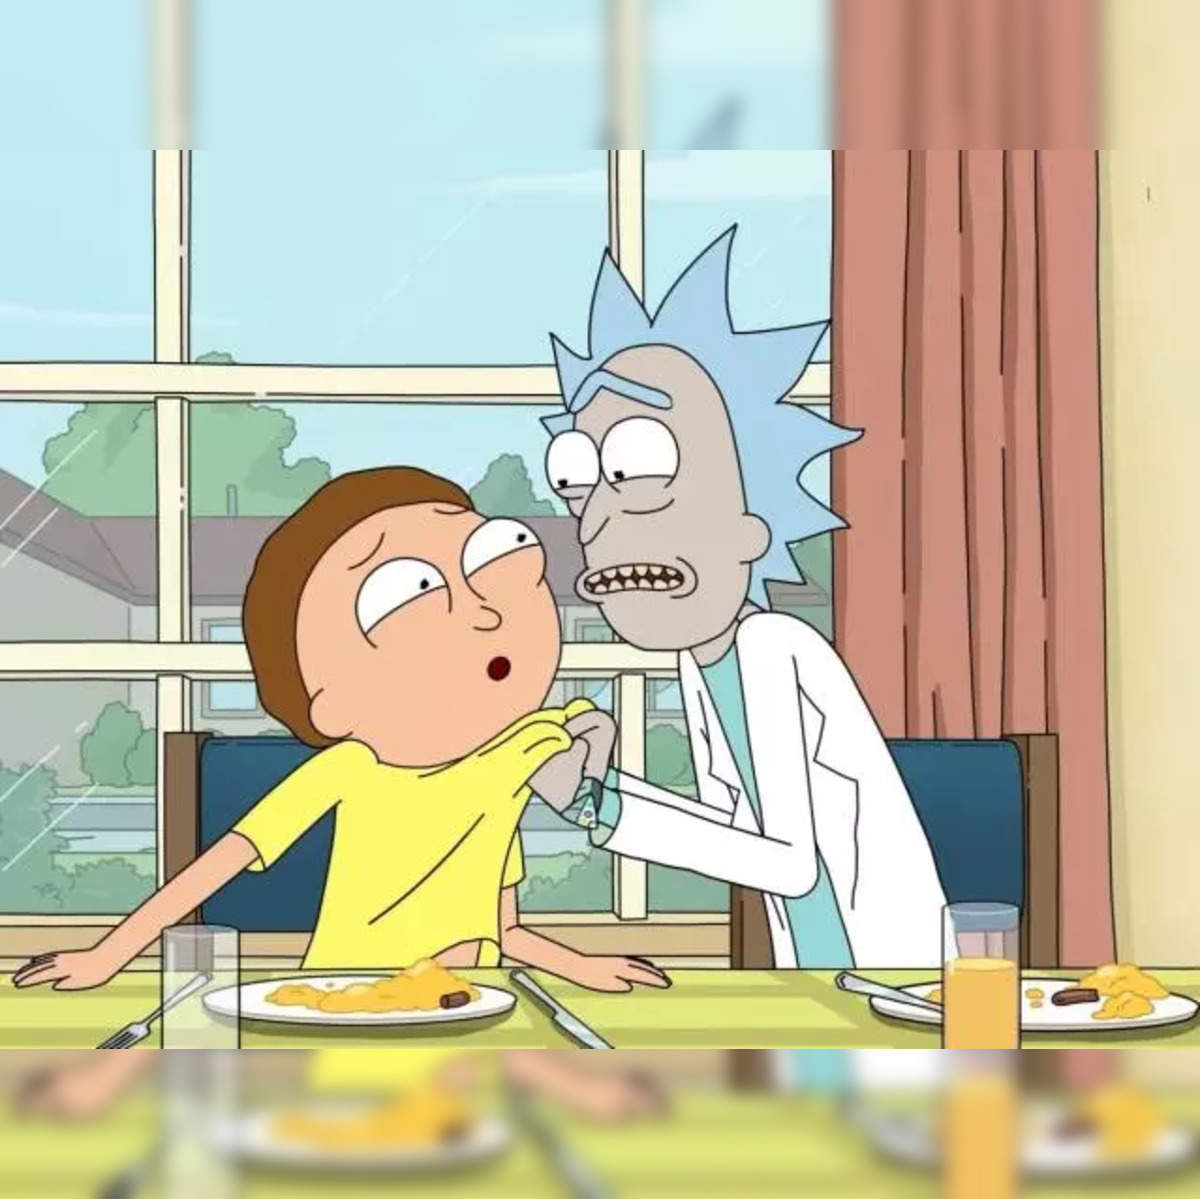 Rick and Morty's Seventh Season Was One of the Best Yet